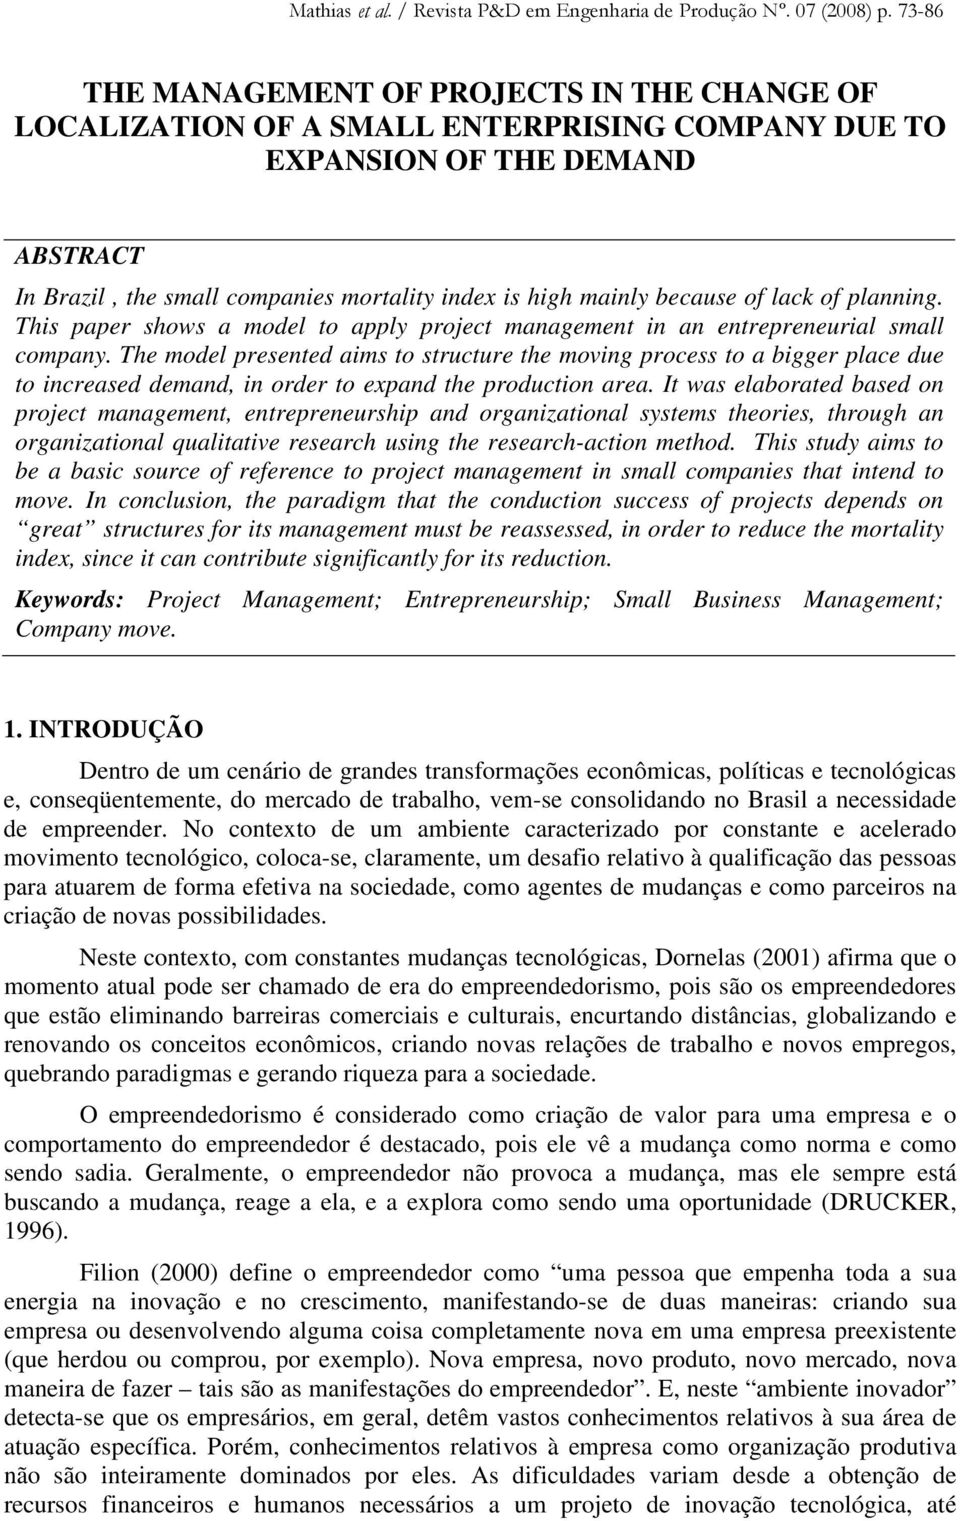 because of lack of planning. This paper shows a model to apply project management in an entrepreneurial small company.